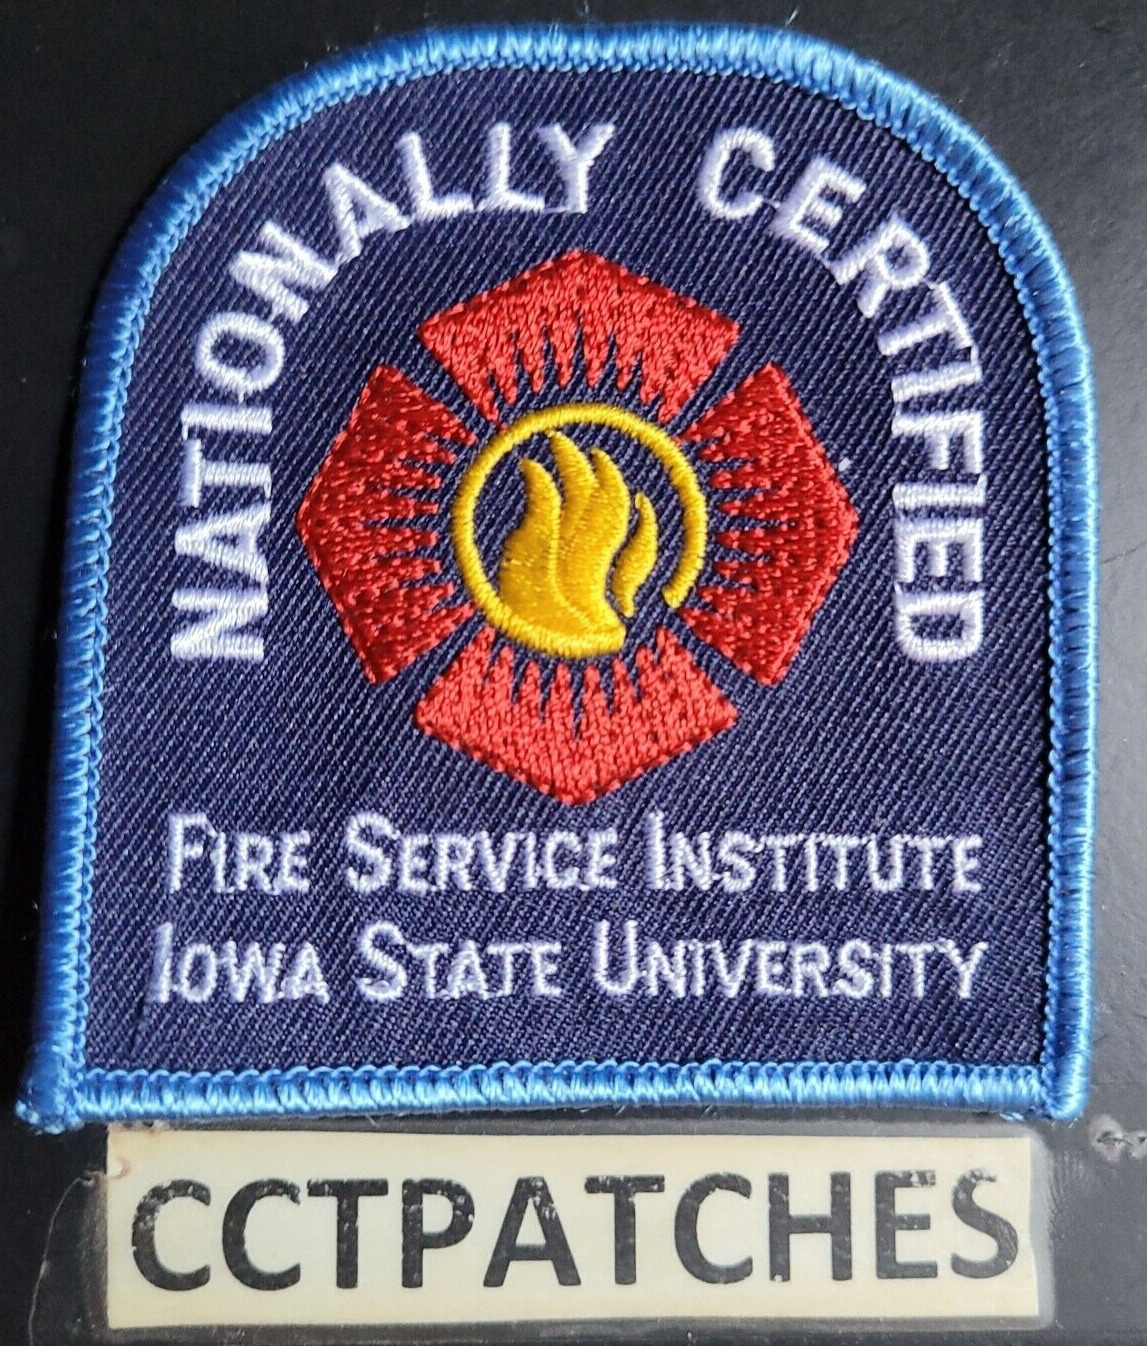 IOWA STATE UNIVERSITY FIRE SERVICE INSTITUTE NATIONALLY CERTIFIED PATCH IA